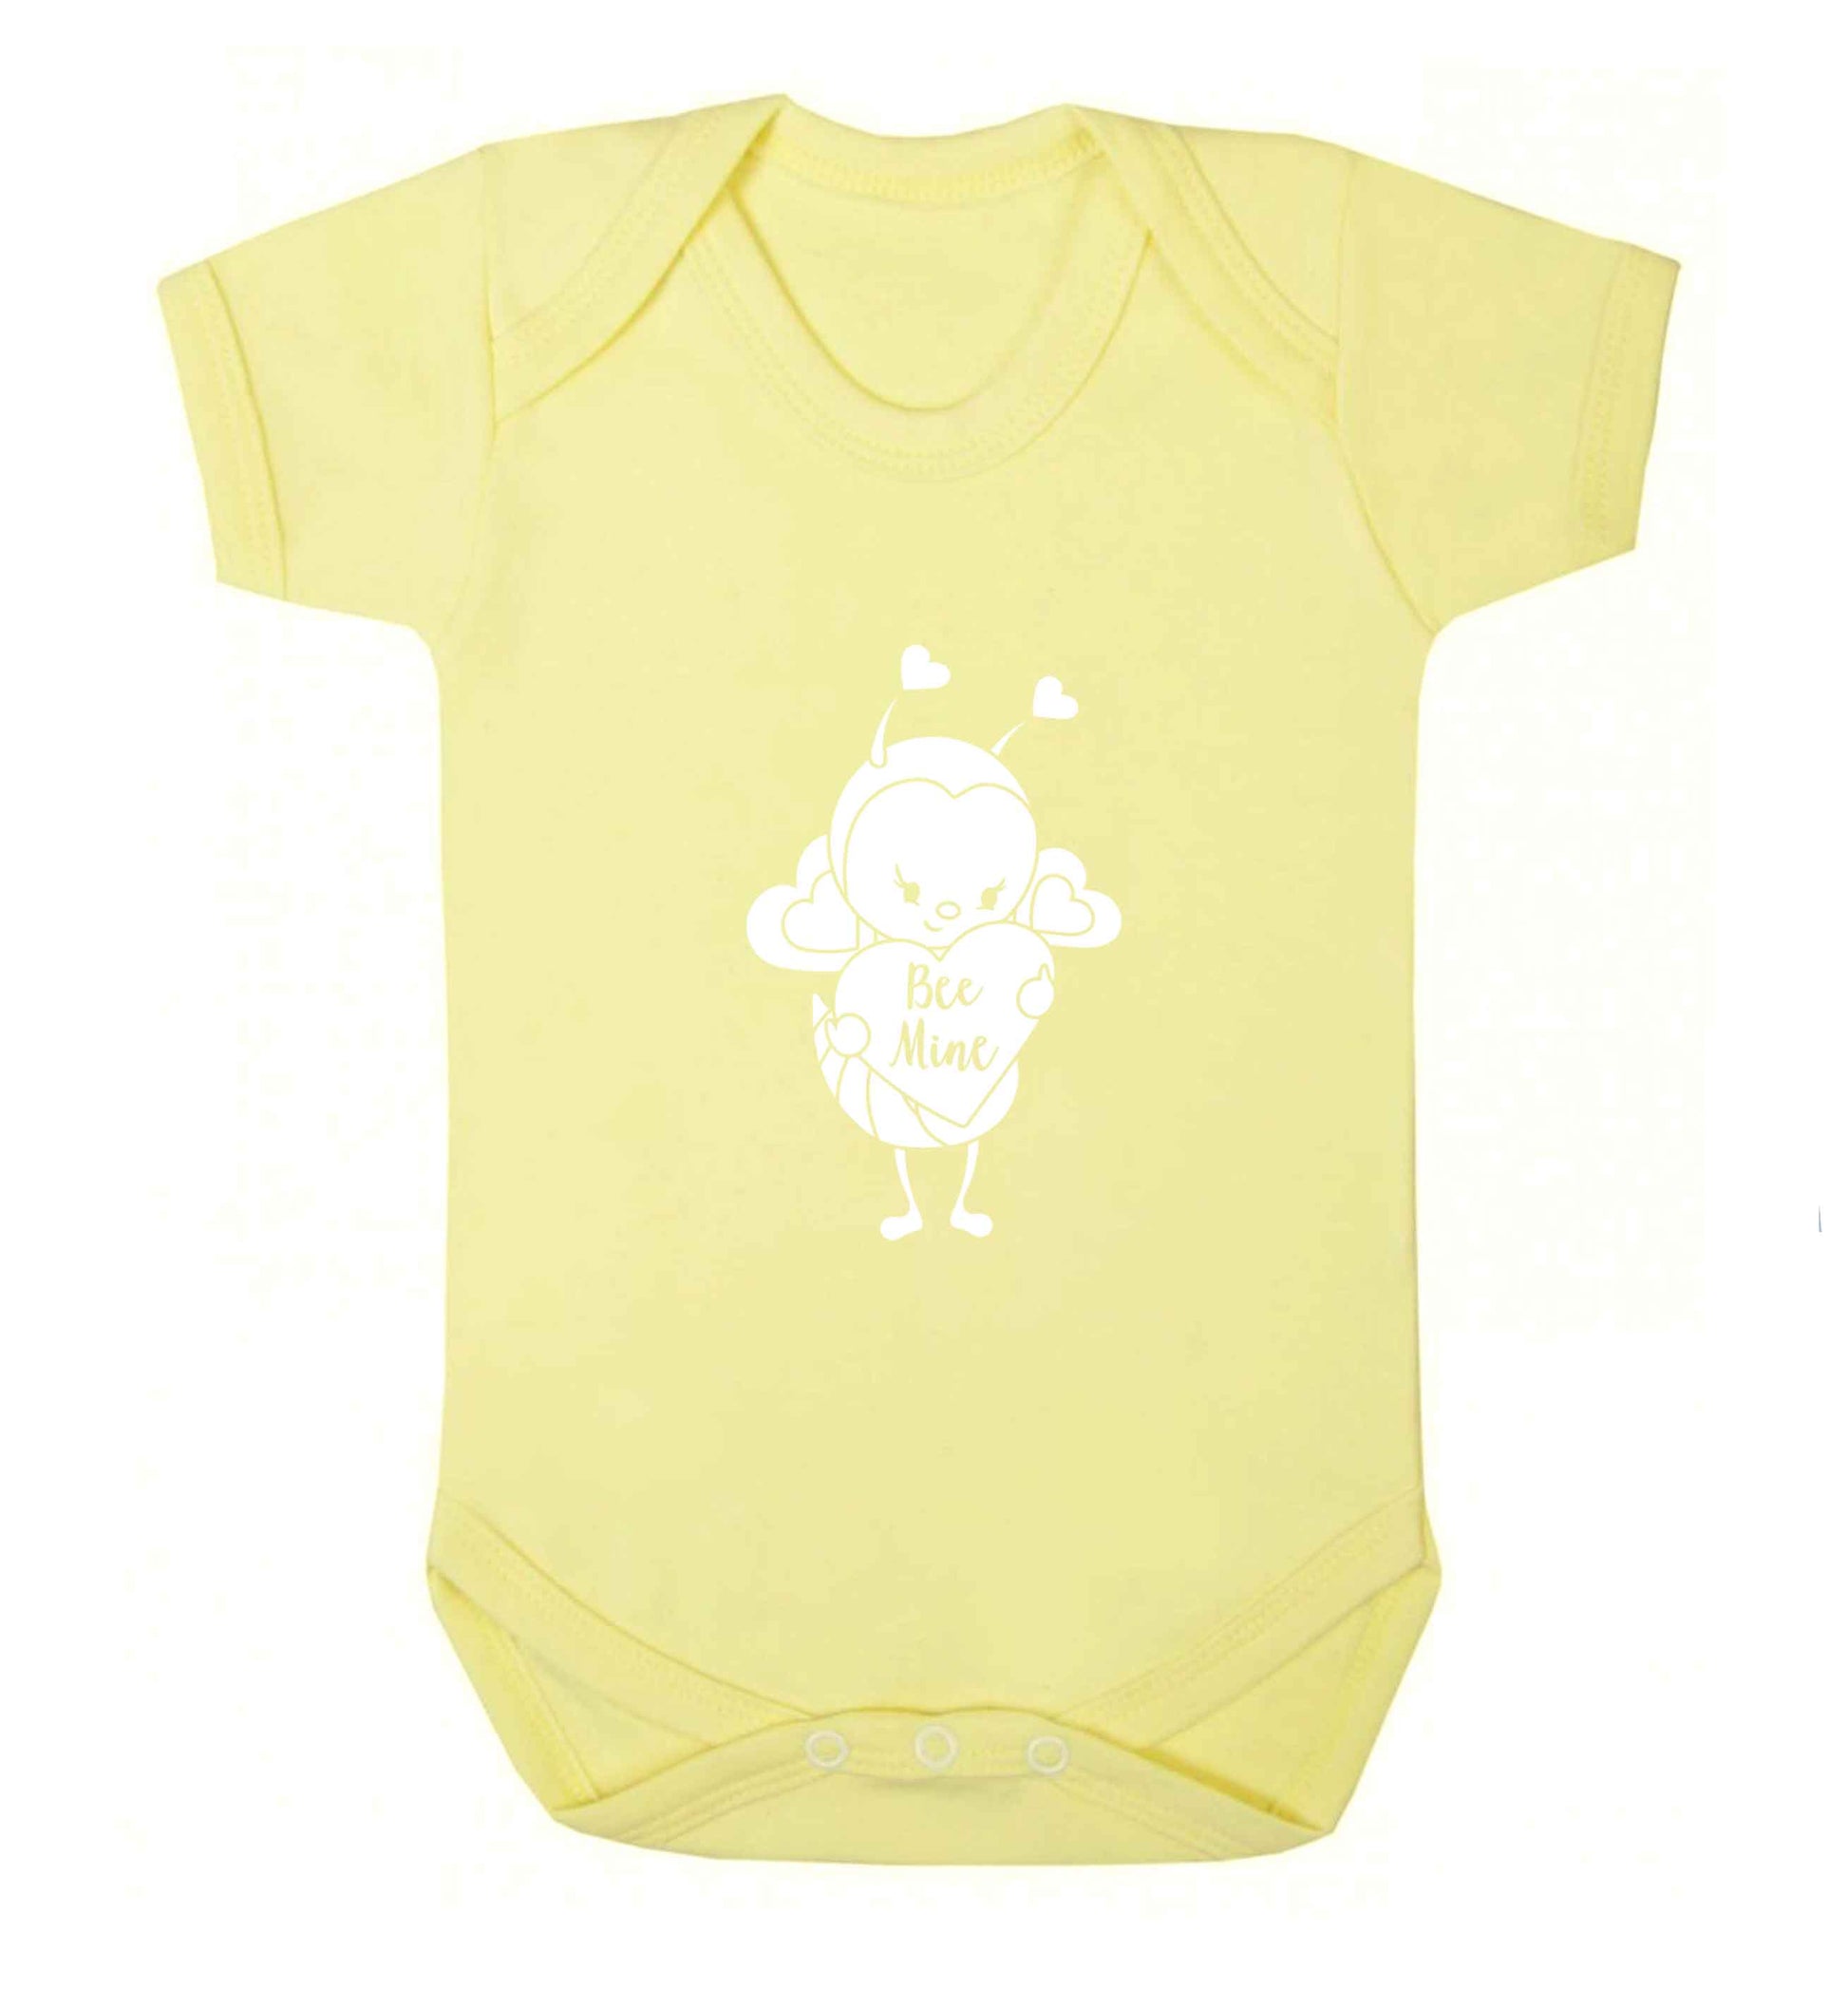 Bee mine baby vest pale yellow 18-24 months